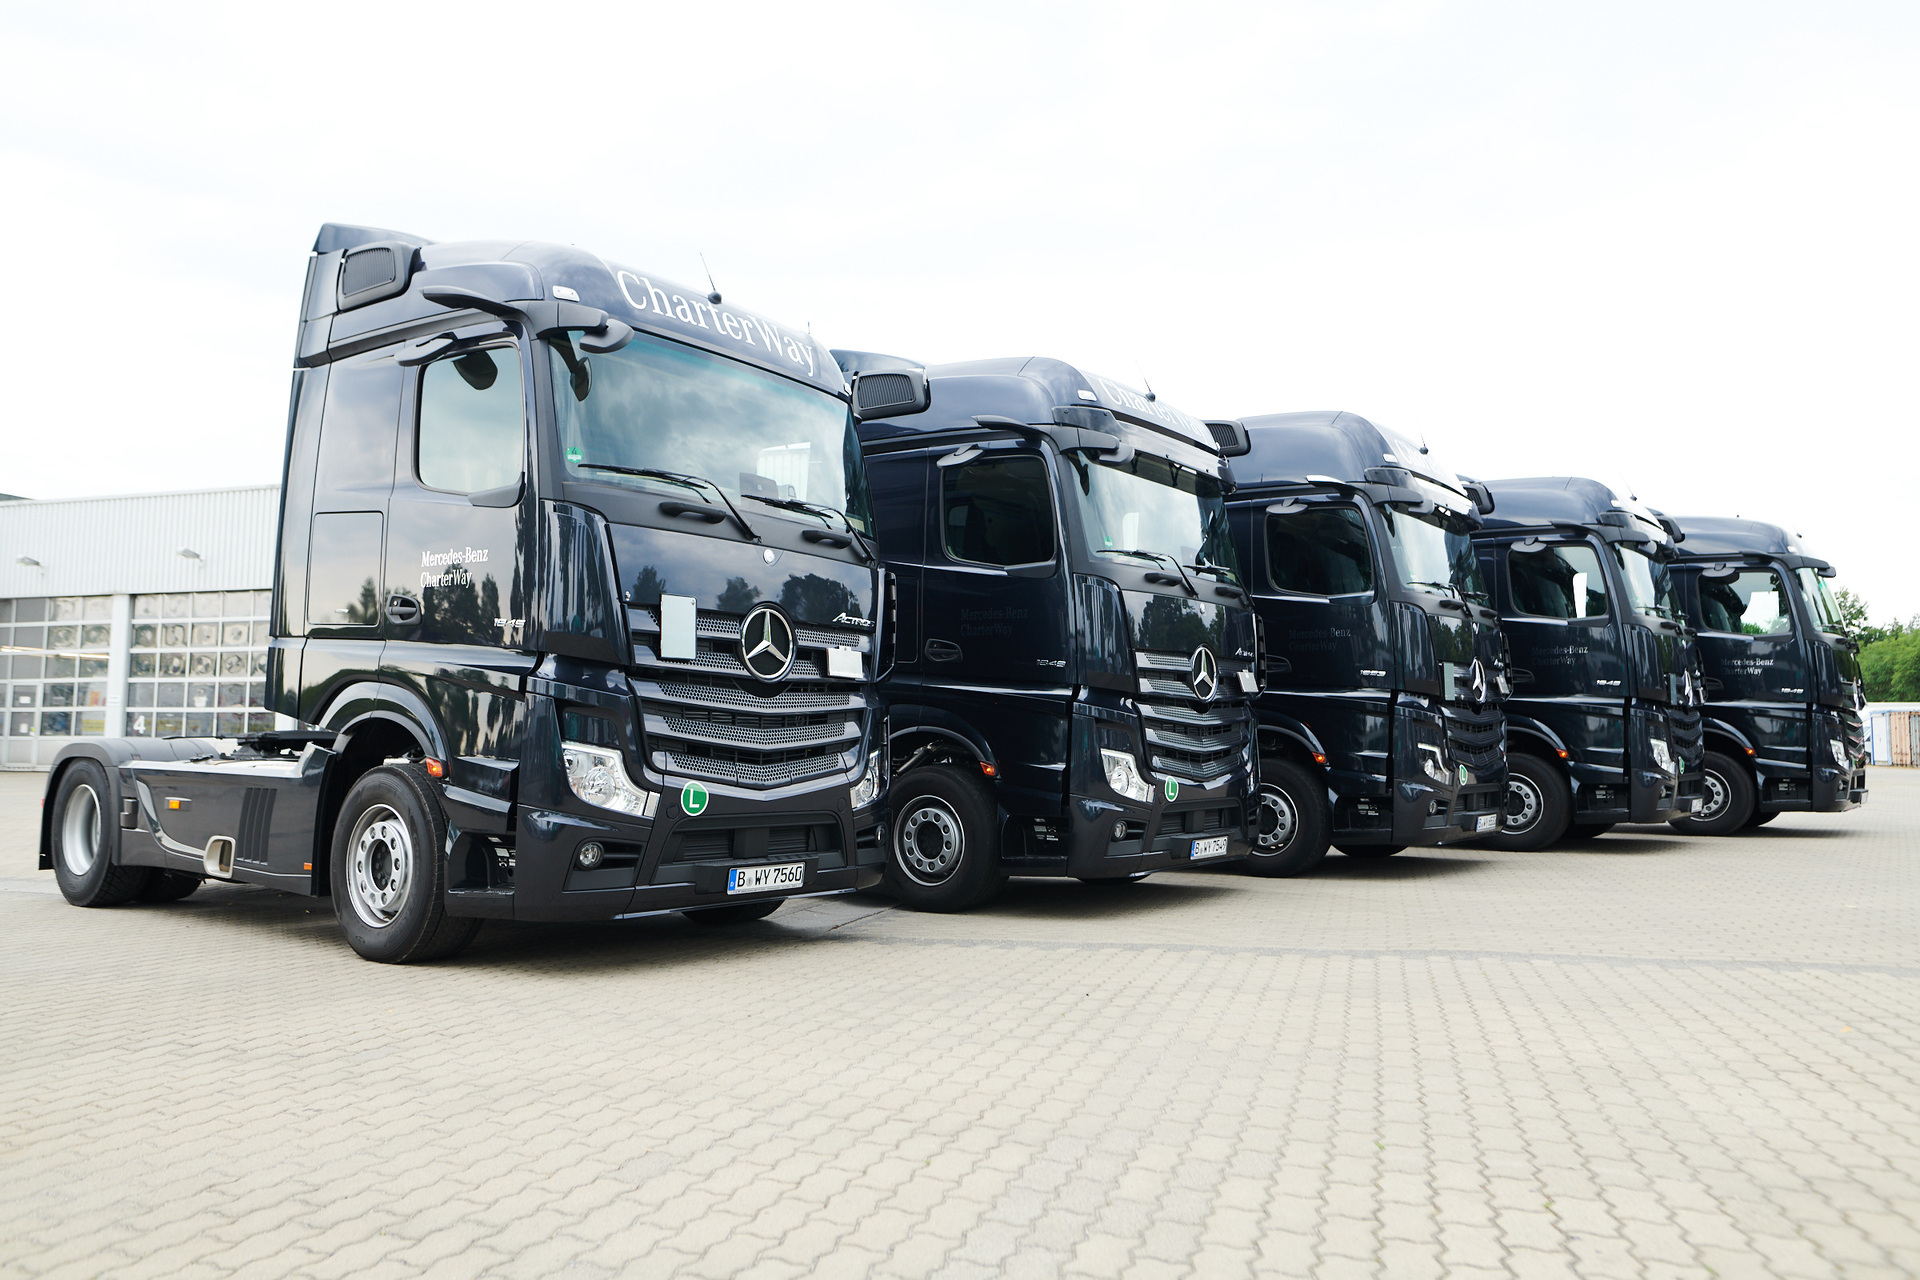 Black is the new white: rent the new Actros at Mercedes-Benz CharterWay